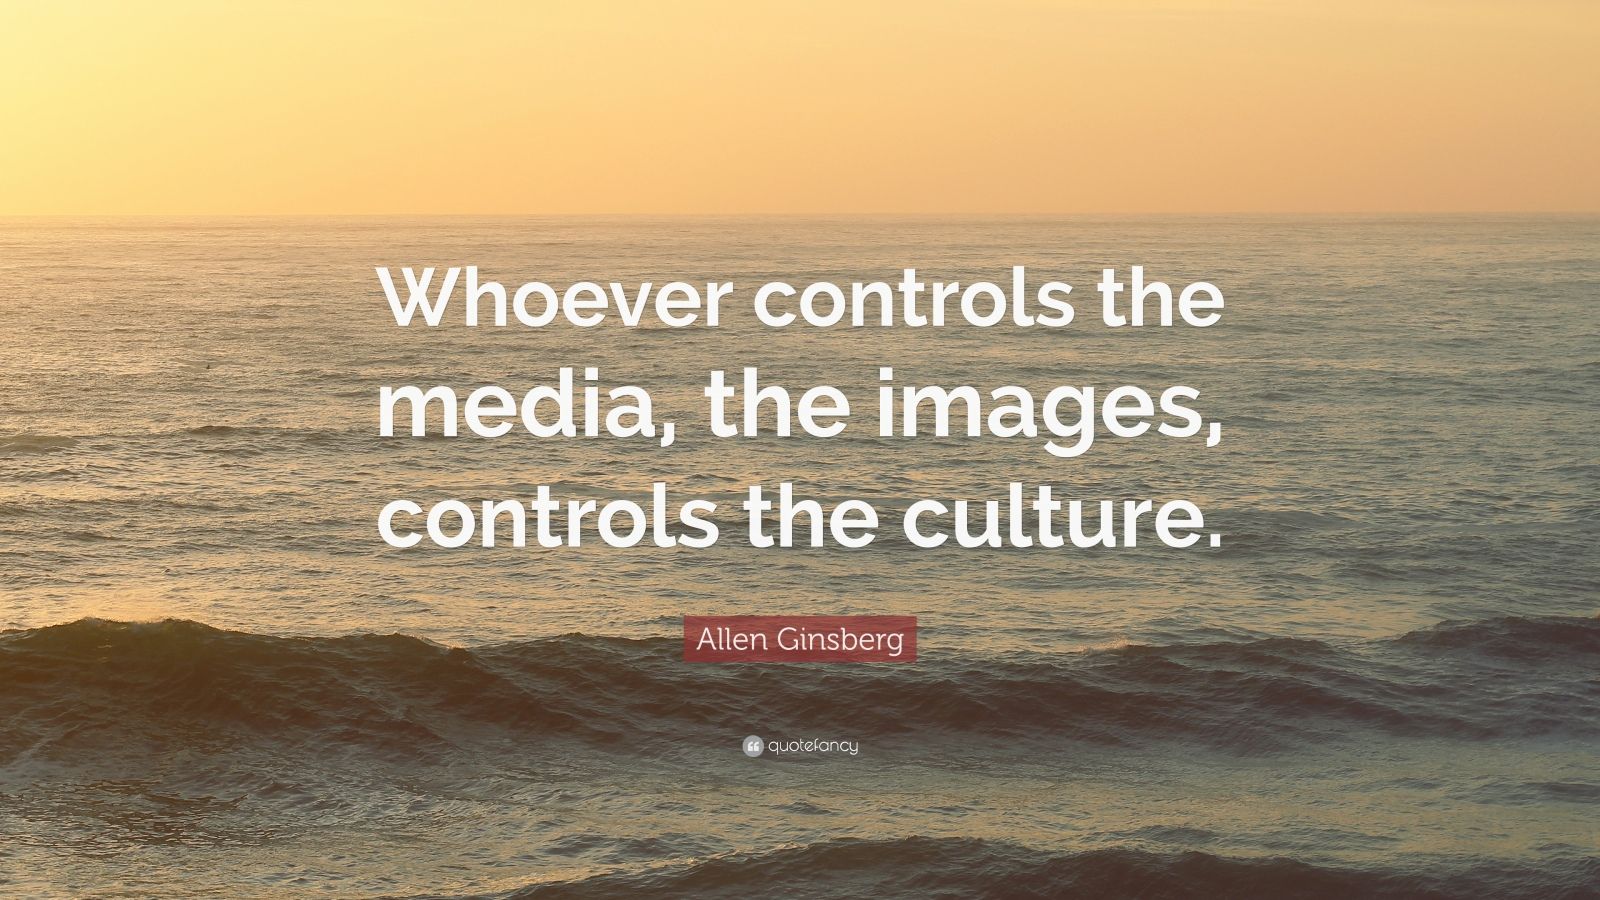 Whoever controls the media controls the culture essay